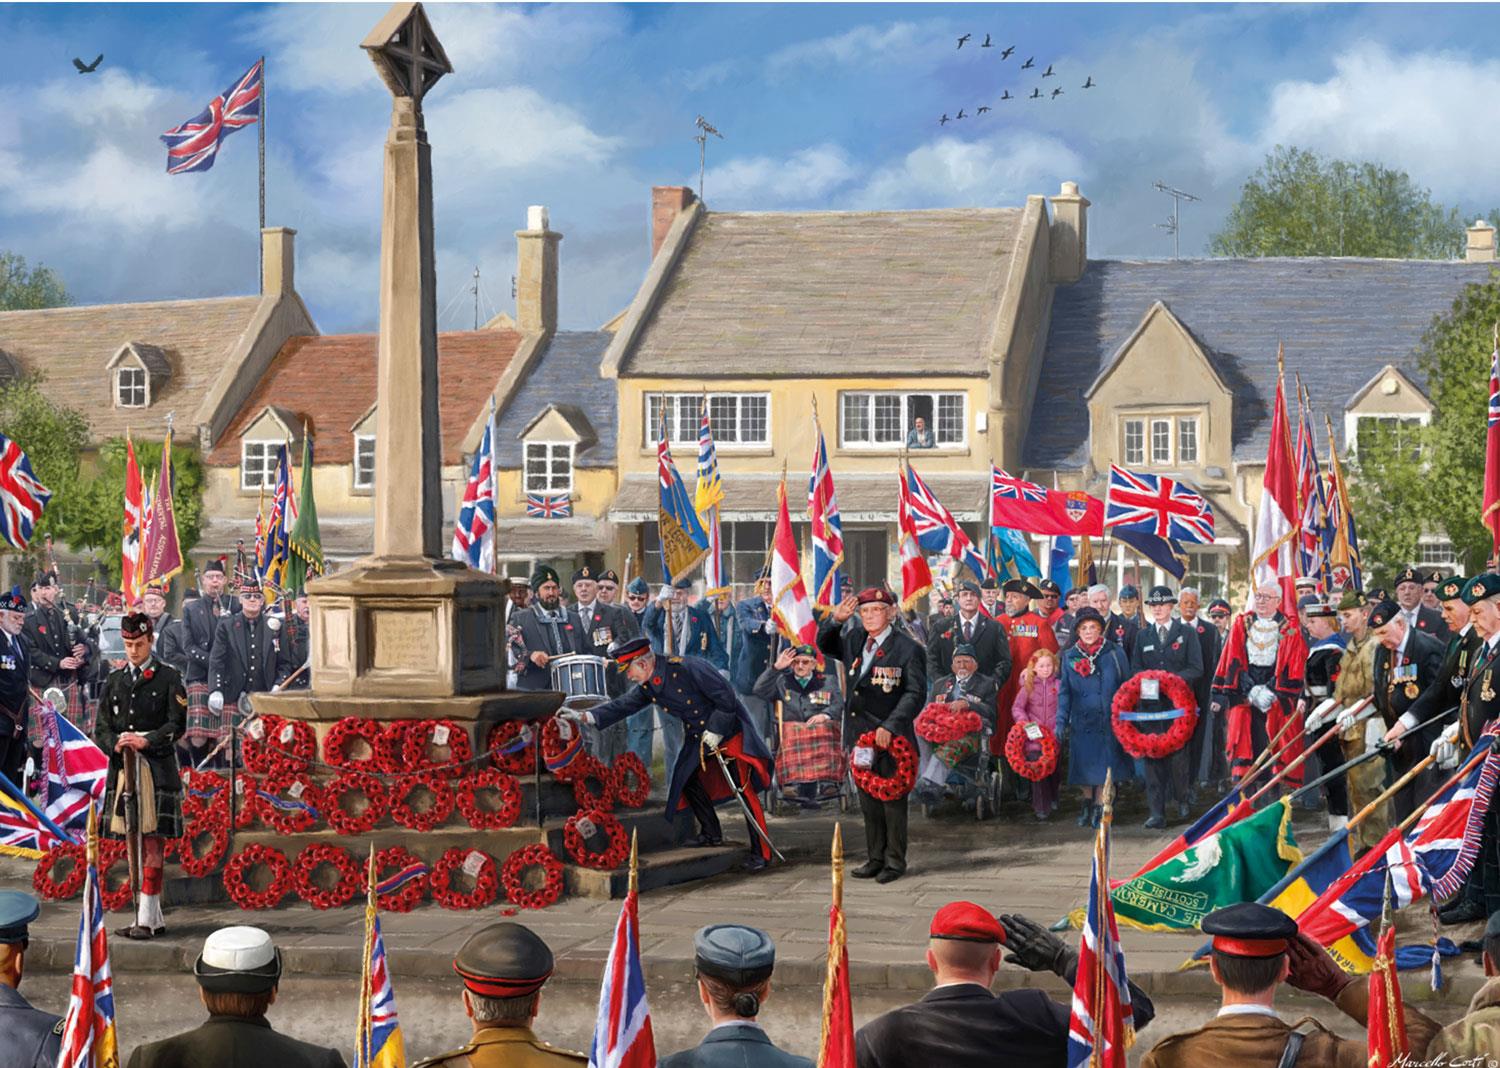 Falcon Deluxe Remembrance Sunday Jigsaw Puzzle (1000 Pieces)